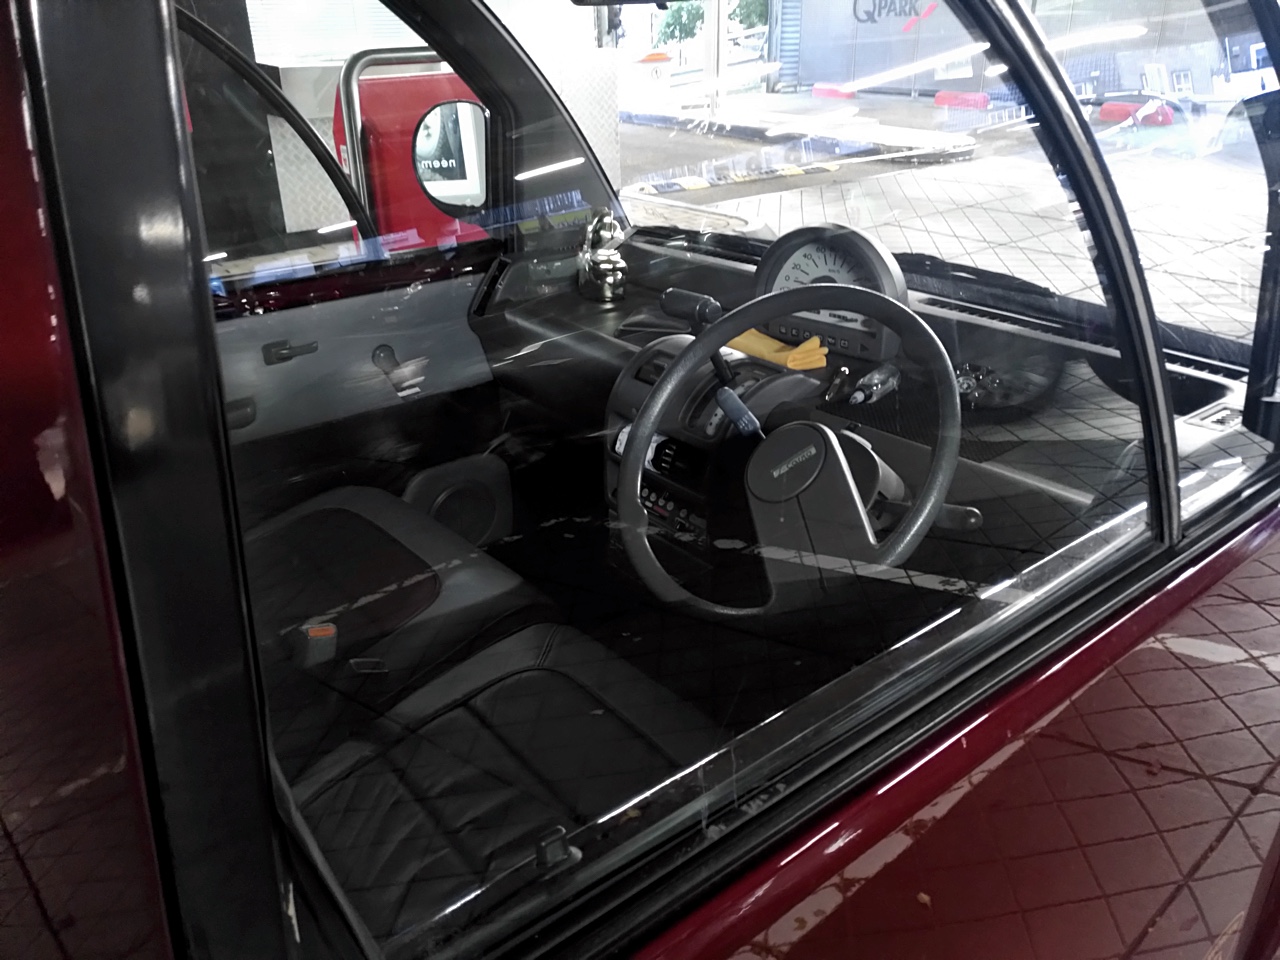 Interior of the 1989 Nissan S-Cargo